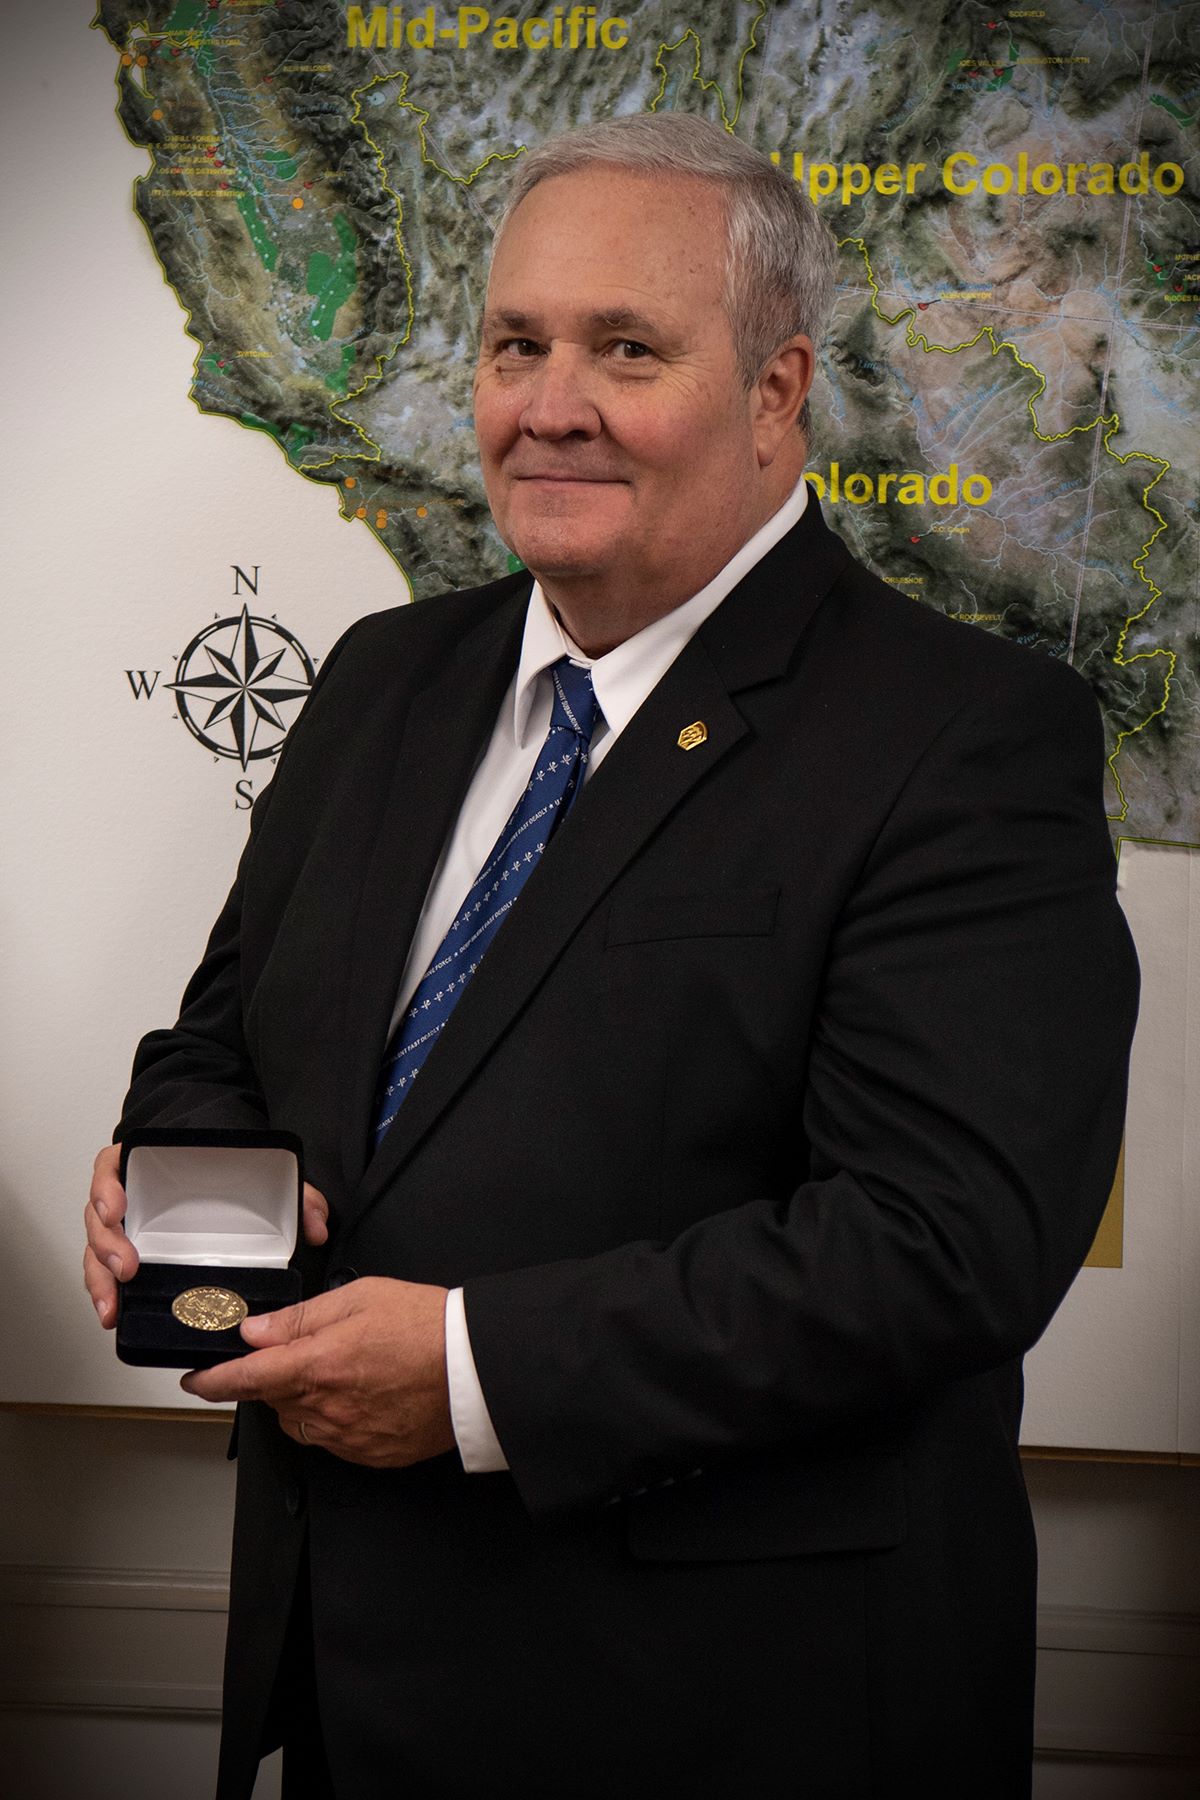 David Arend awarded medal of valor from the Department of the Interior. Photo from Chris Clark.